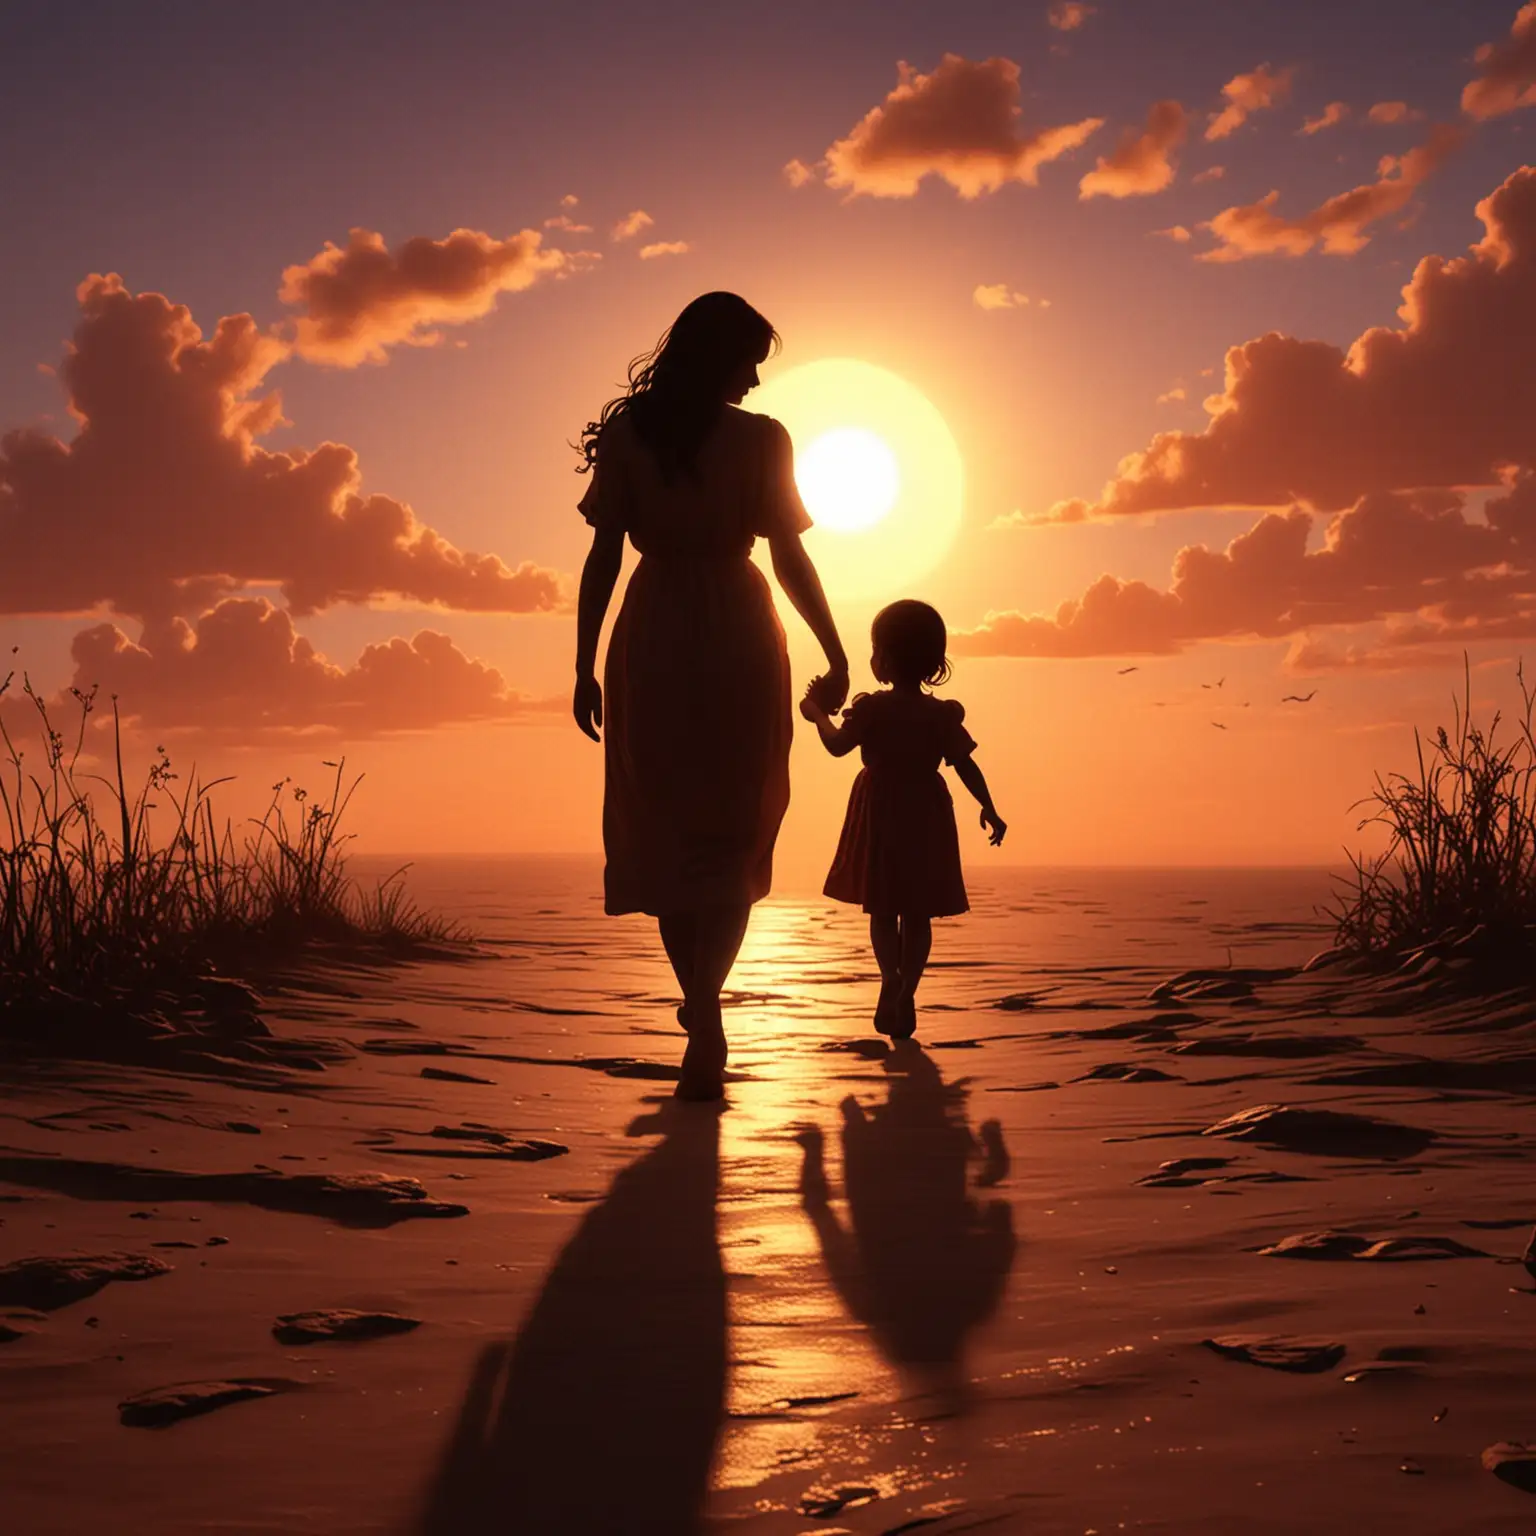 Mother and Child Silhouette Walking into Sunset Eternal Love and Guidance Animation